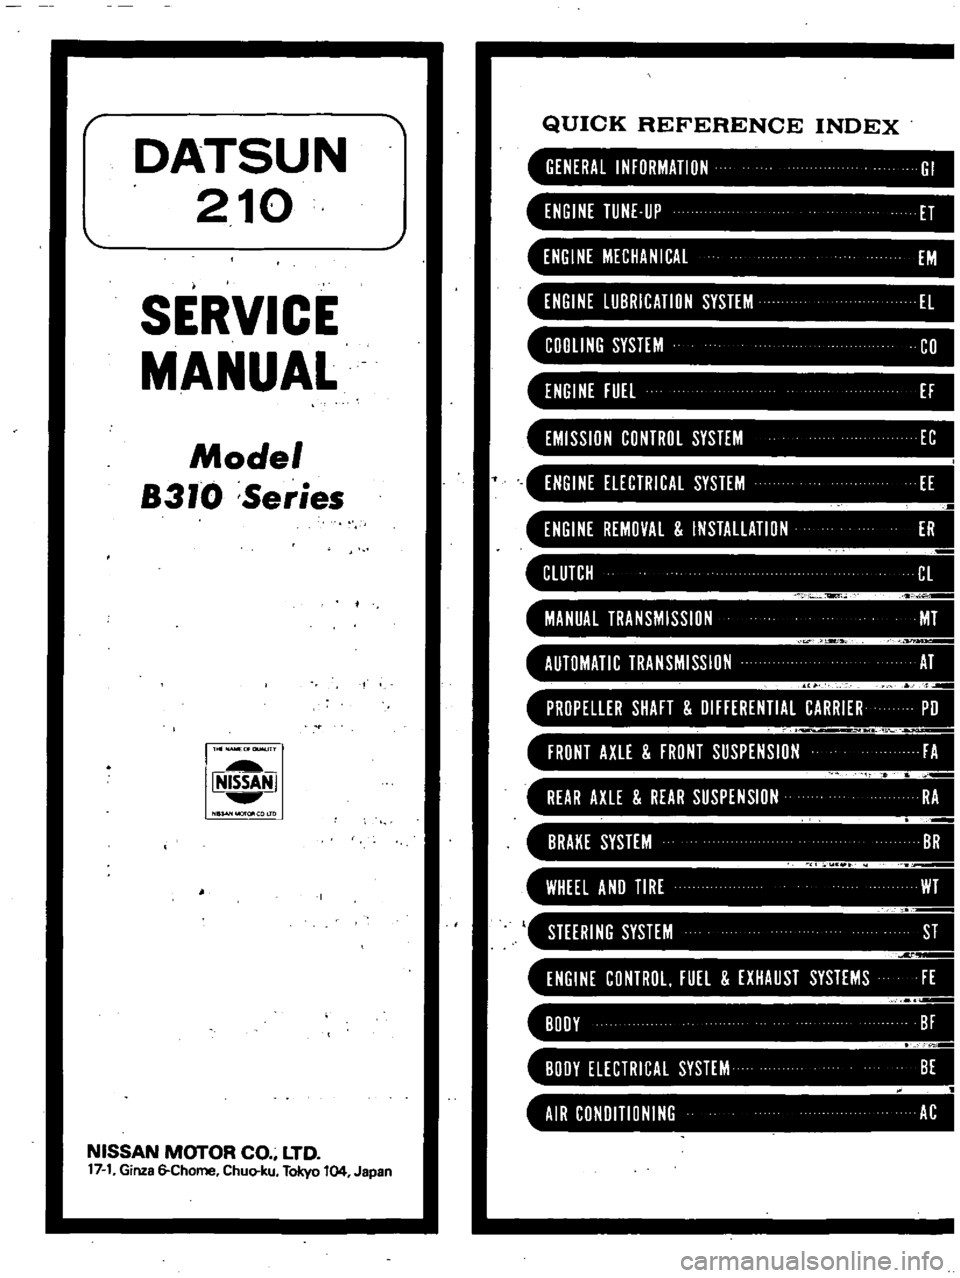 DATSUN 210 1979  Service Manual 
DATSUN

210

SERVICE

MANUAL

Model

8310 
Series

T

OfOUoW
lTY

INISSAN

N 
OIlCOIIO

NISSAN 
MOTOR

CO 
LTD

17 
1

Ginza 
6 
Chome

Chuo 
ku

Tokyo 
104

Japan 
QUICK 
REFERENCE

INDEX

GENERAL 
